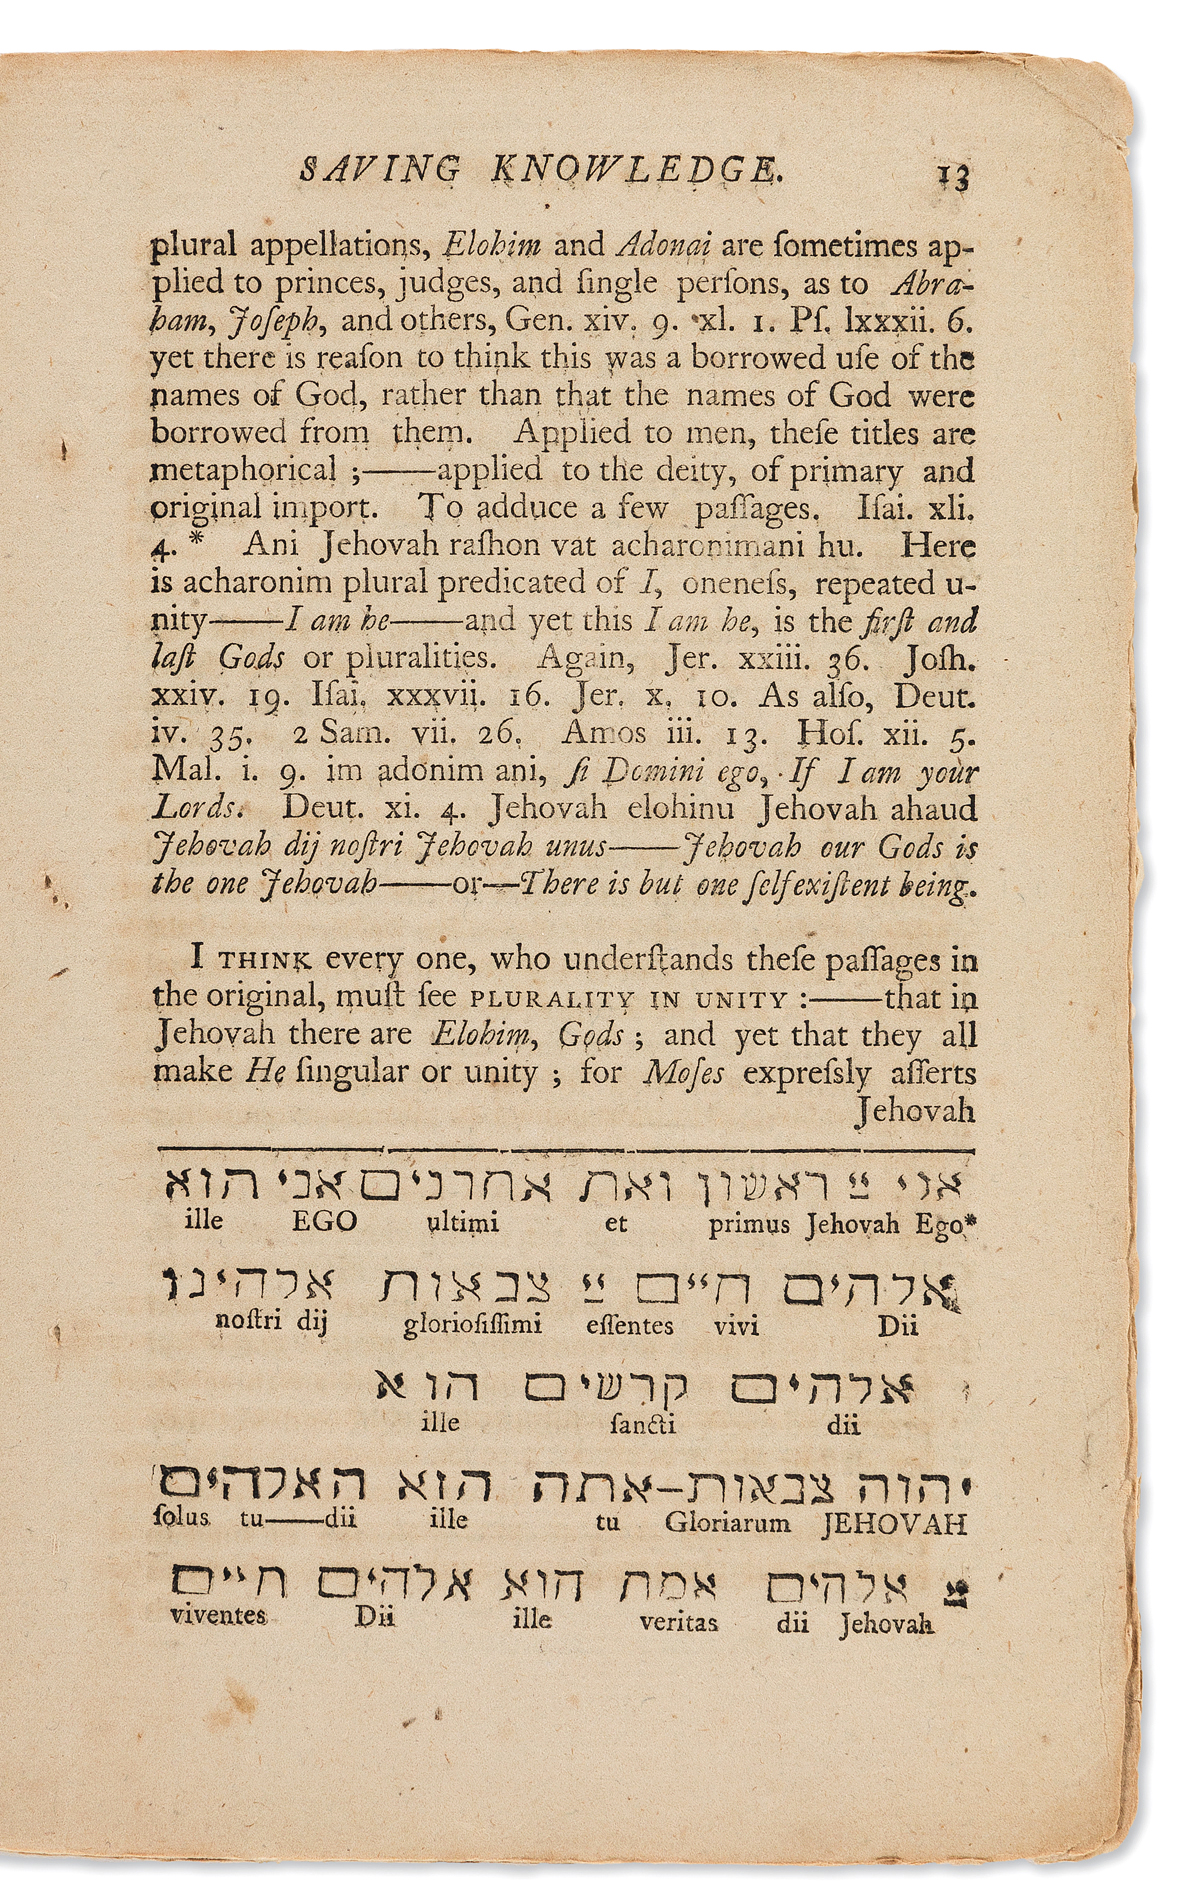 (JUDAICA.) Ezra Stiles. A Discourse on Saving Knowledge: Delivered at the Instalment of the Reverend Samuel Hopkins.